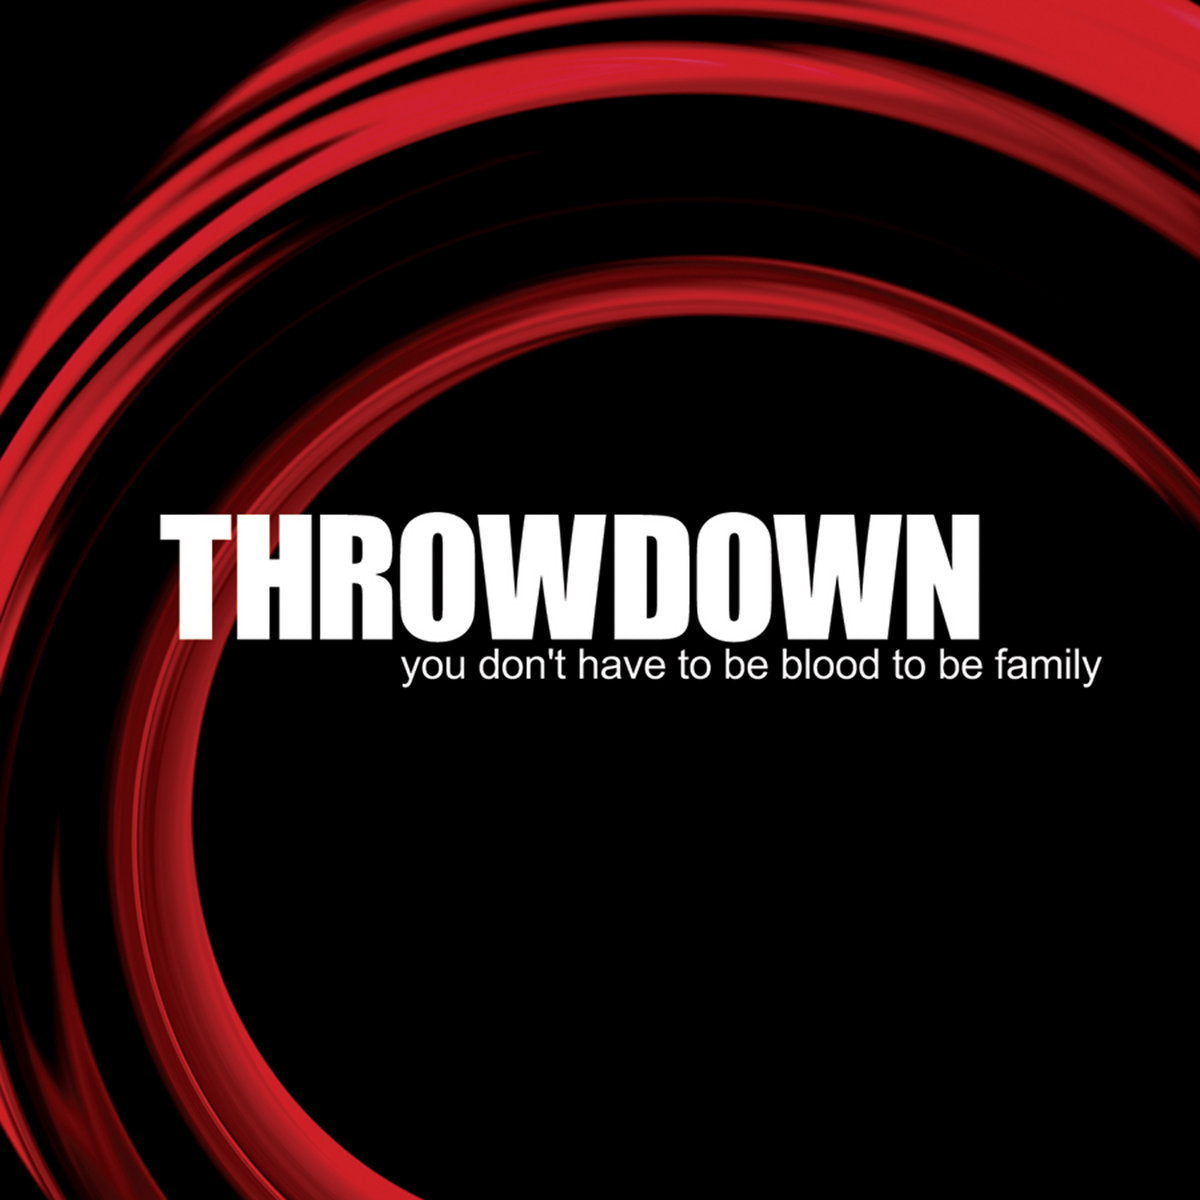 Throwdown "You Don't Have To Be Blood To Be Family" 12" Vinyl